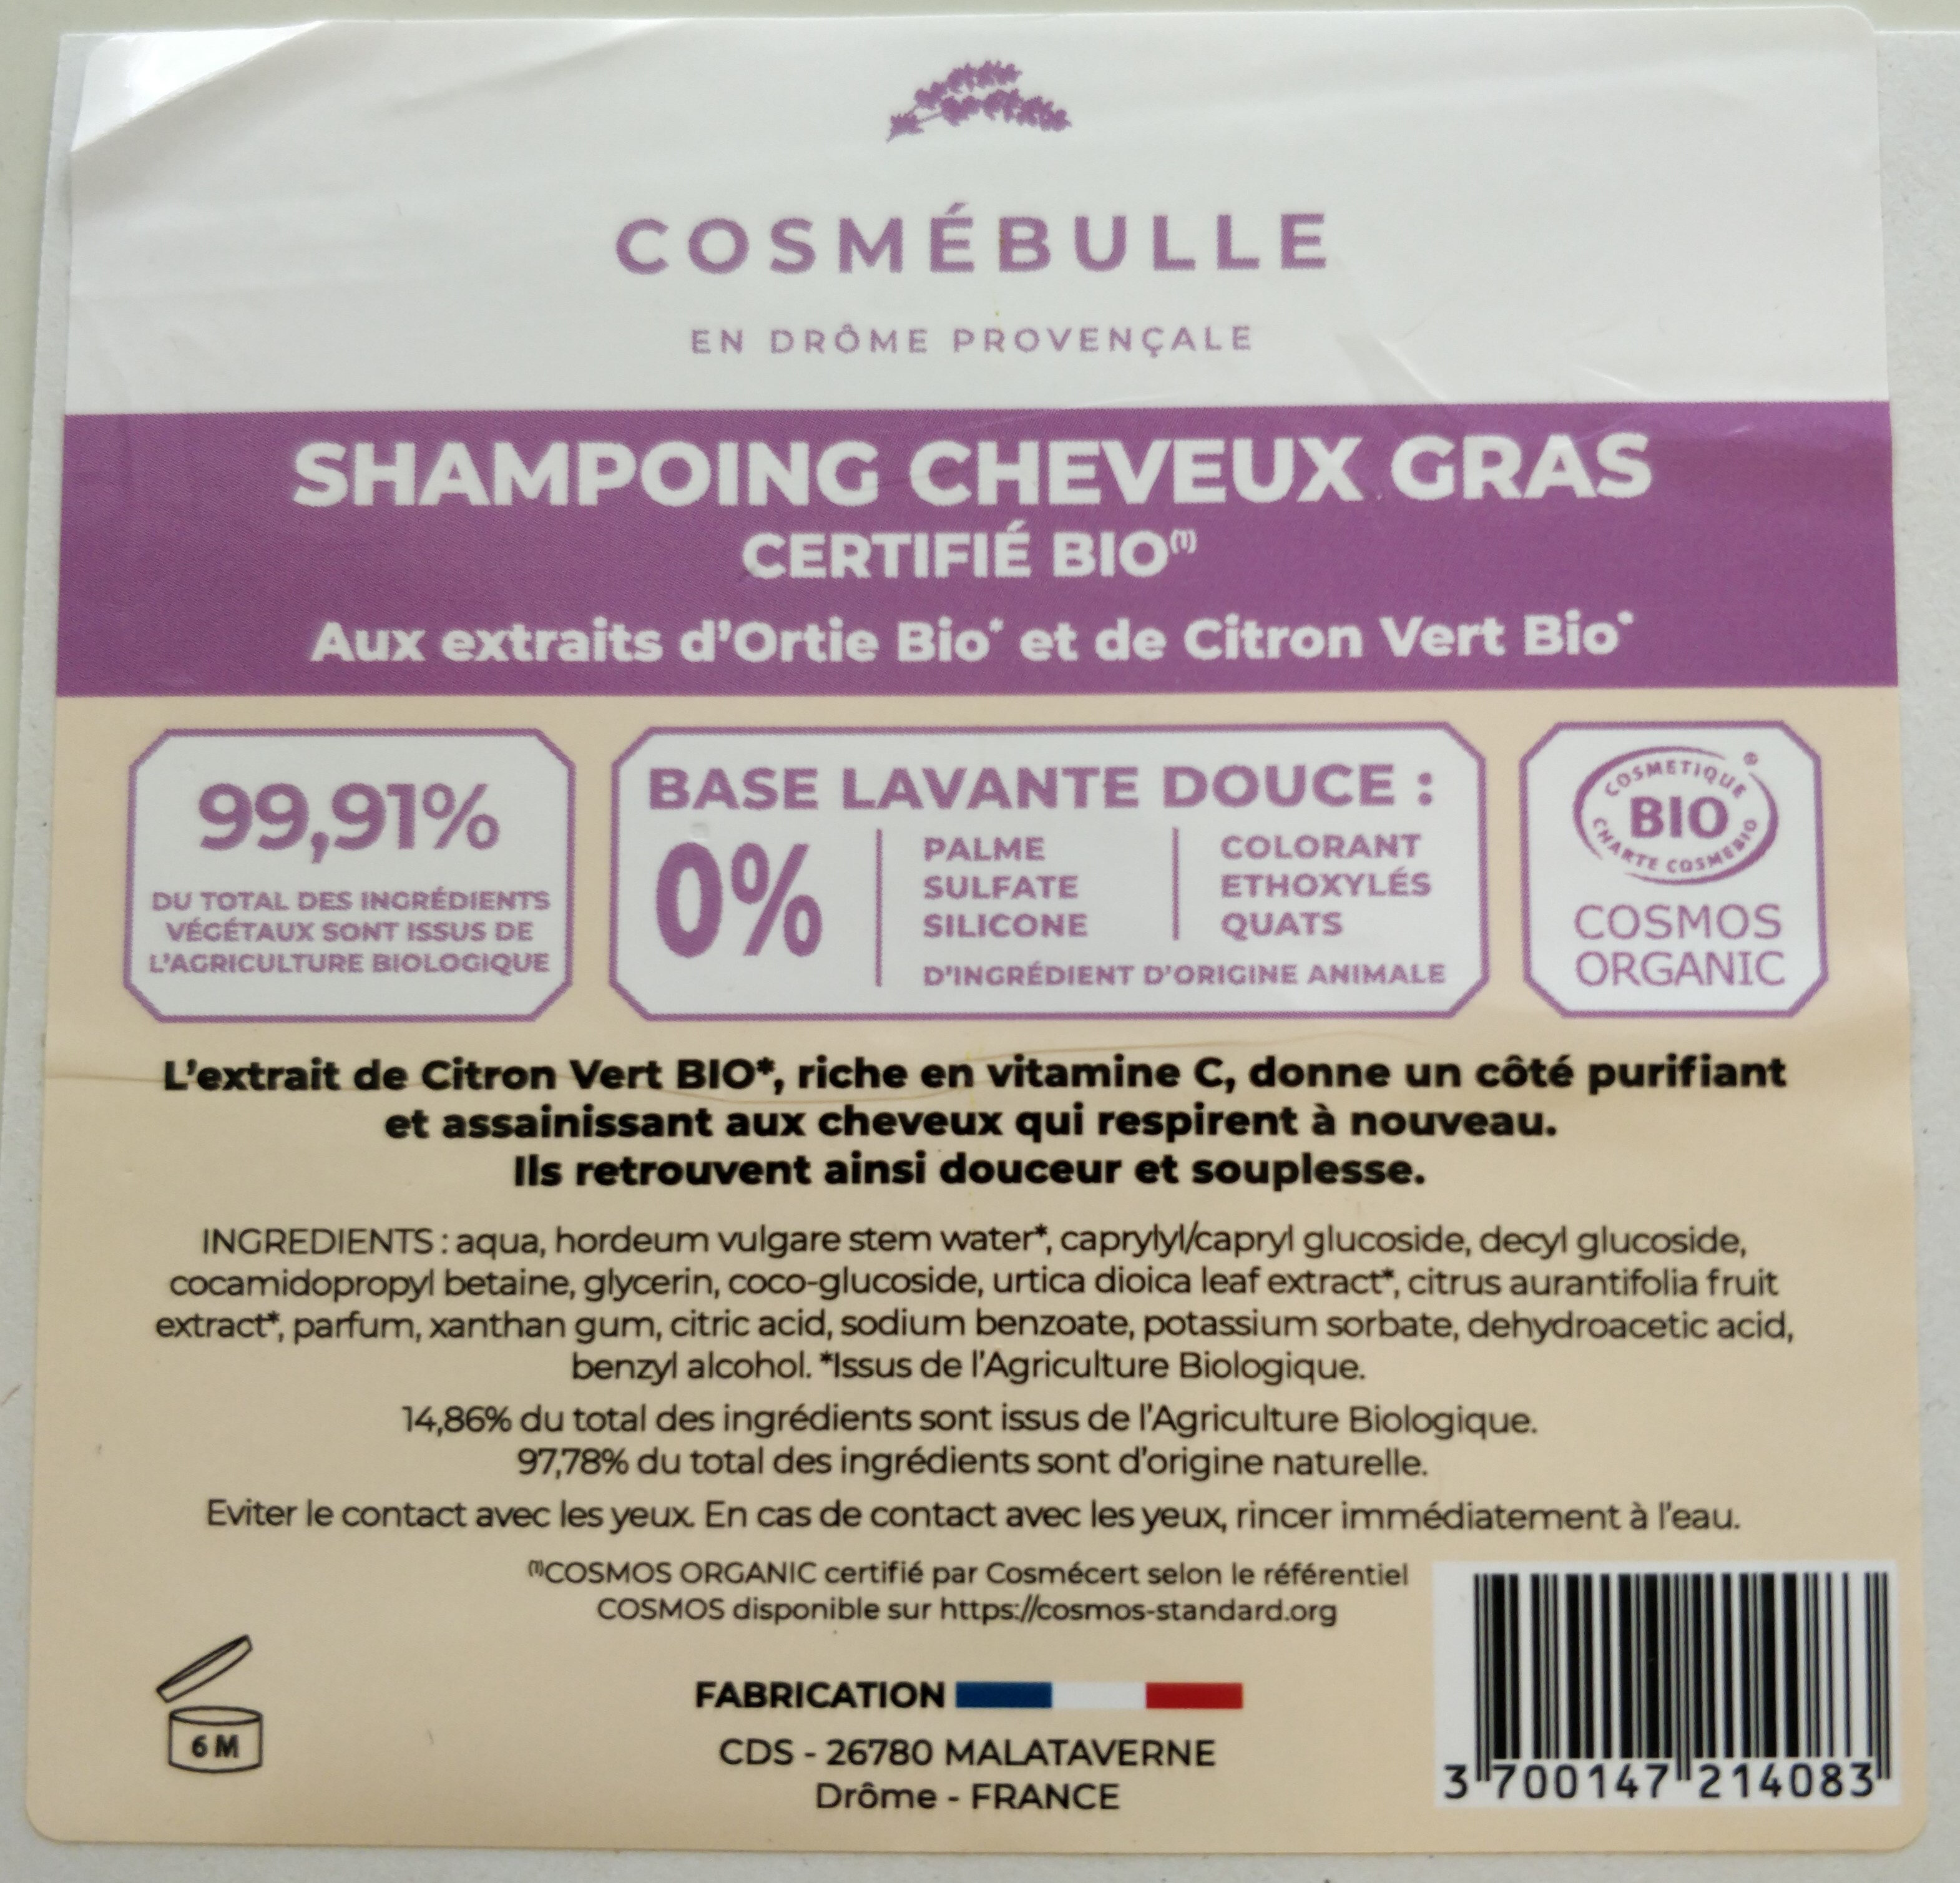 Shampoing cheveux gras - Tuote - fr